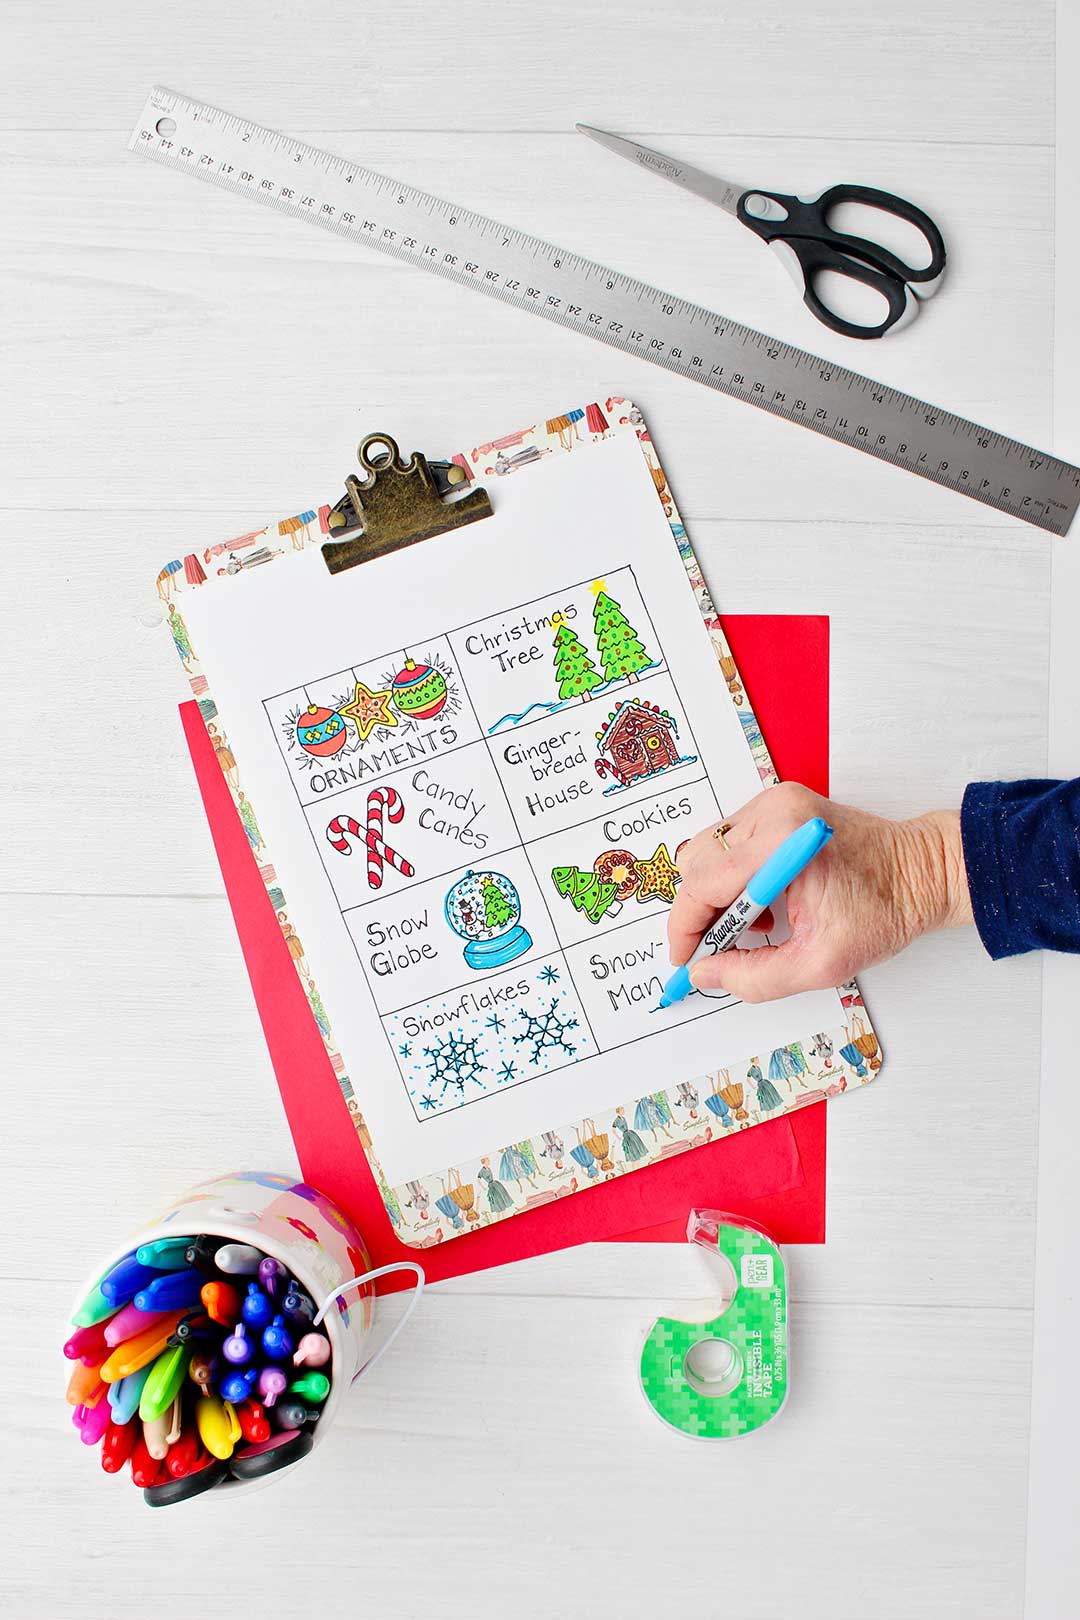 Printout of different Christmas cards you can color and use for the headbands game as well as permanent markers, a ruler, scissors, tape and red paper.